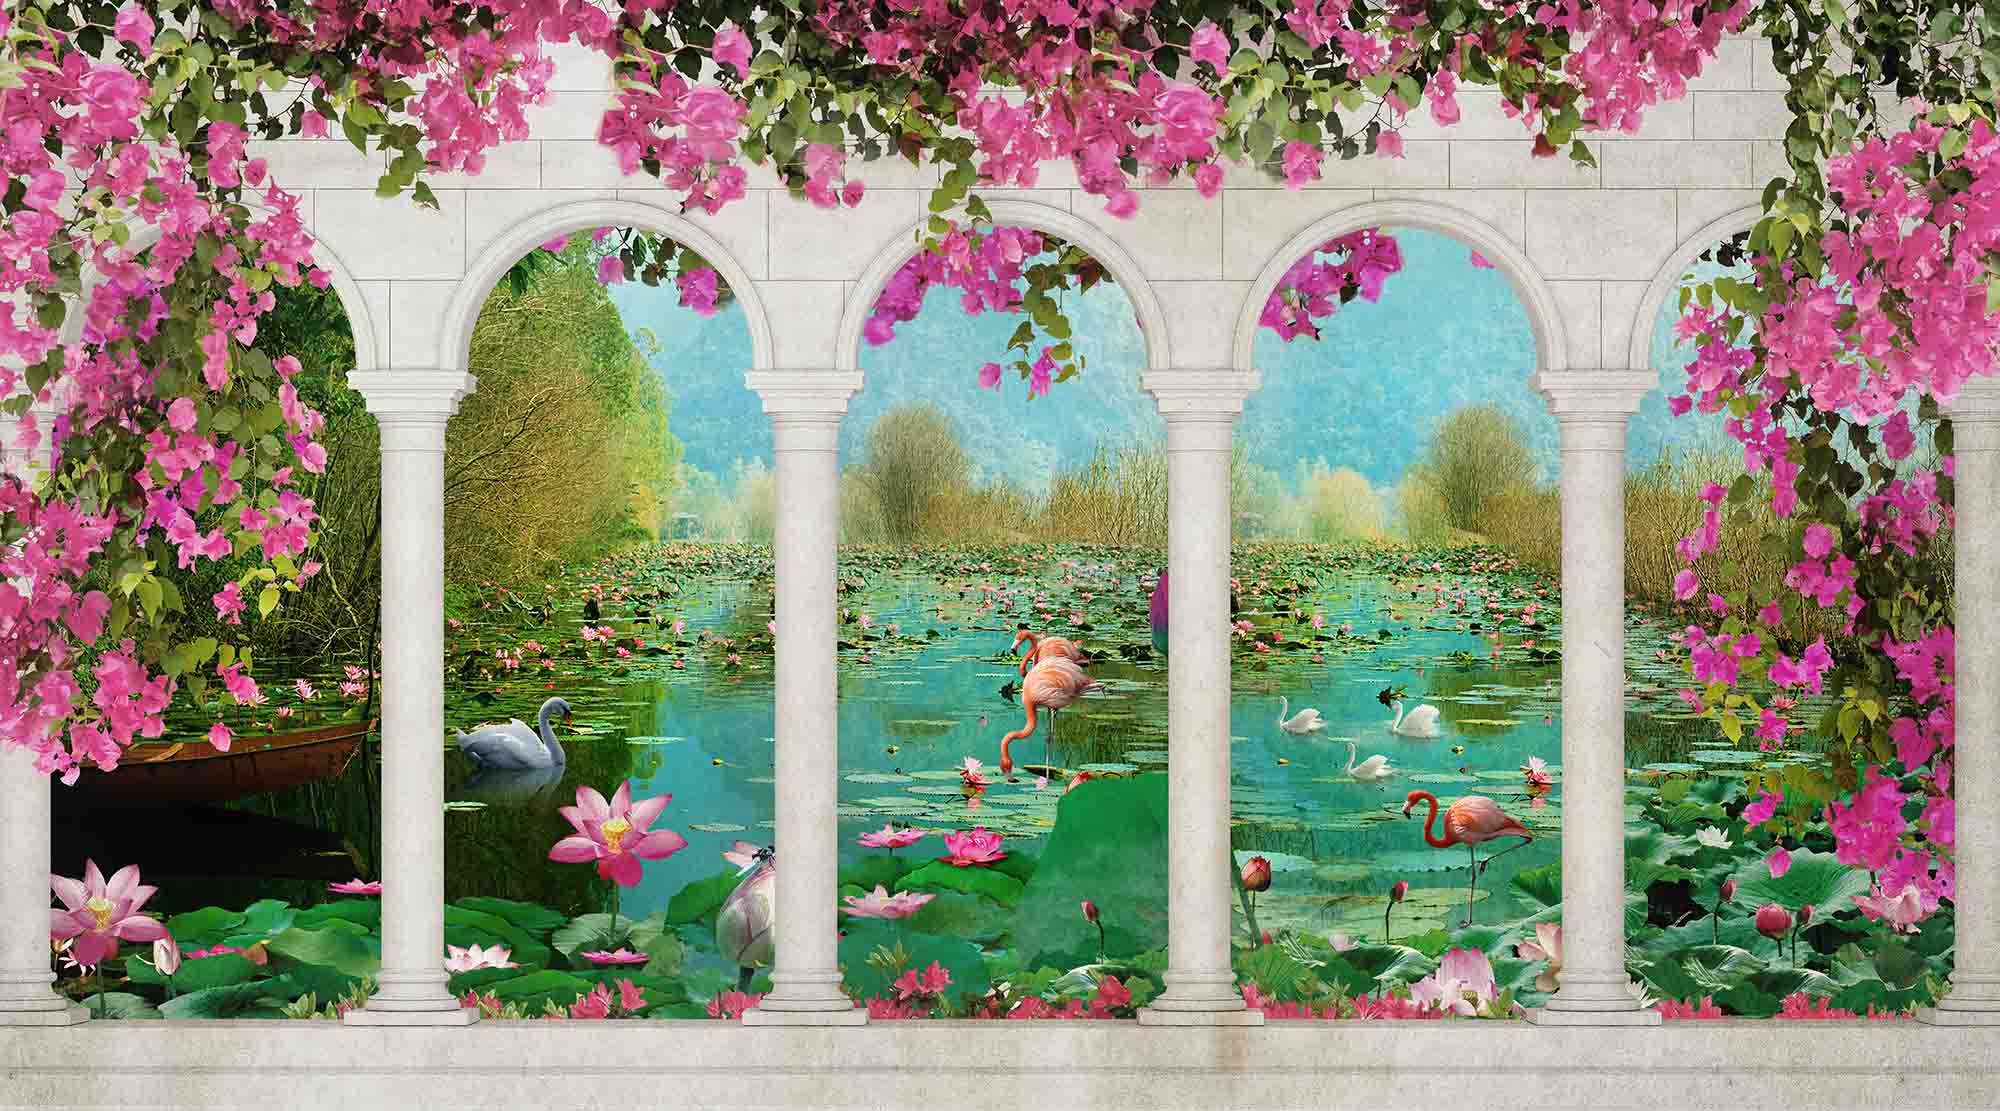 HD stereoscopic arch courtyard wallpaper 3d mural painting for Home Interior